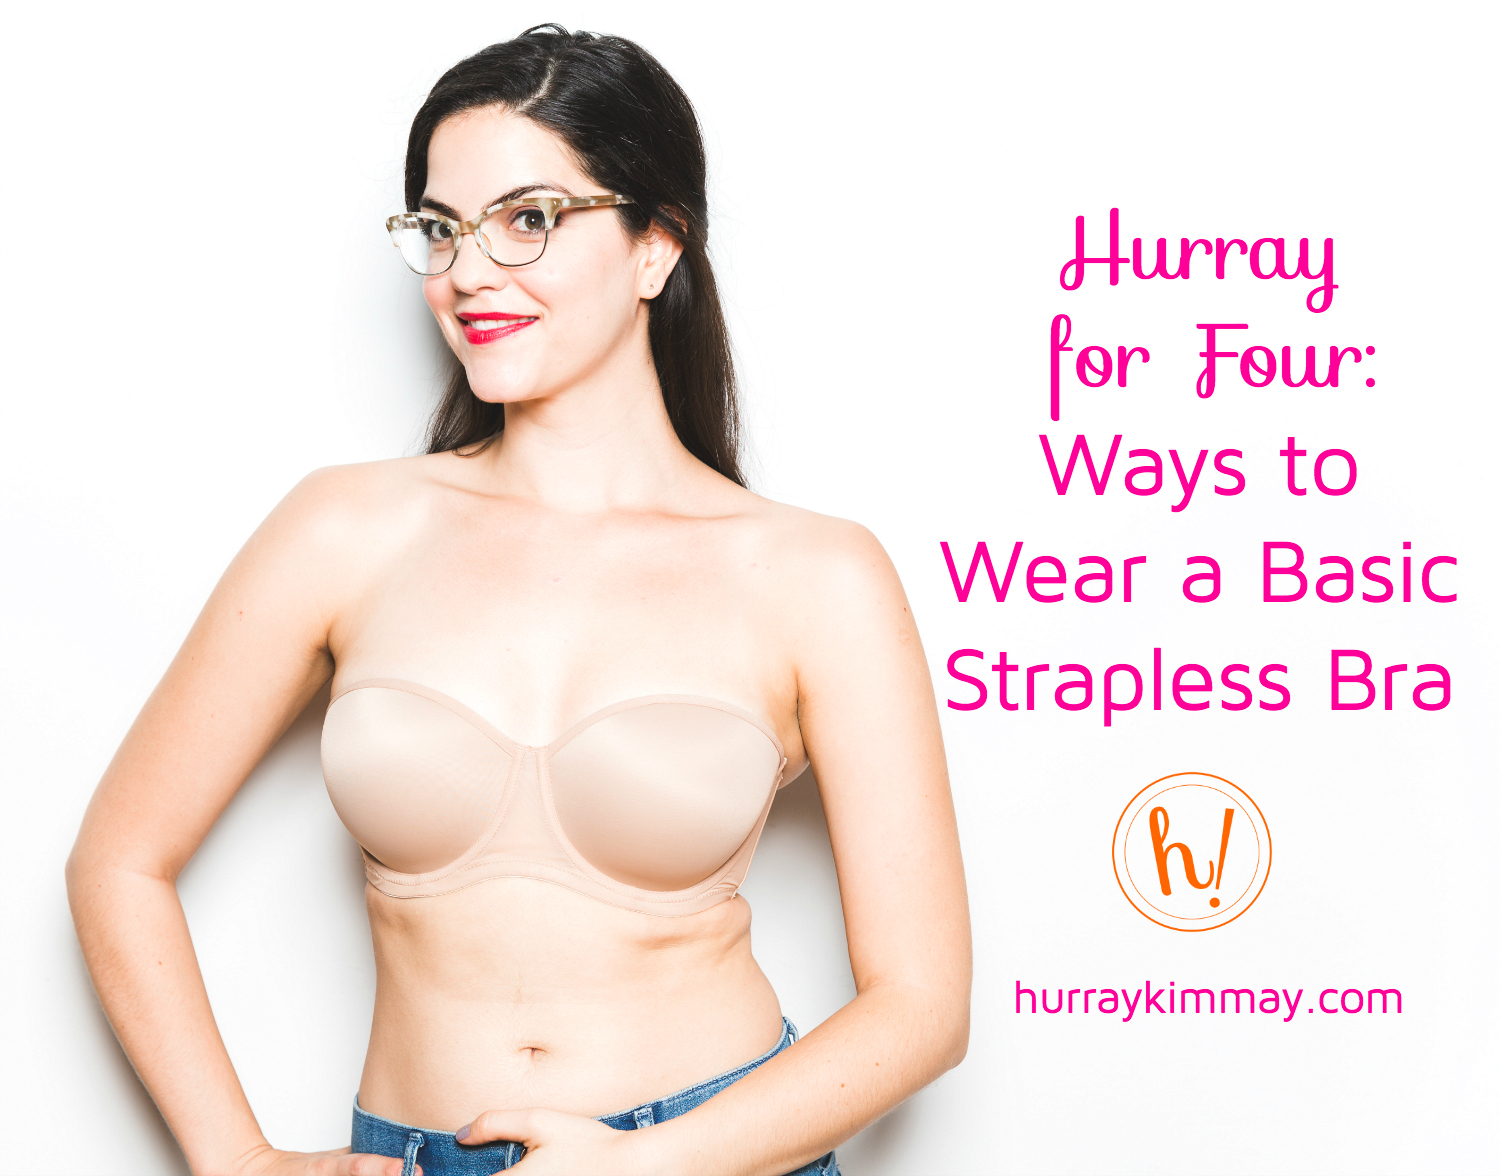 Tips To Make Any Bra Work For Strapless Outfits